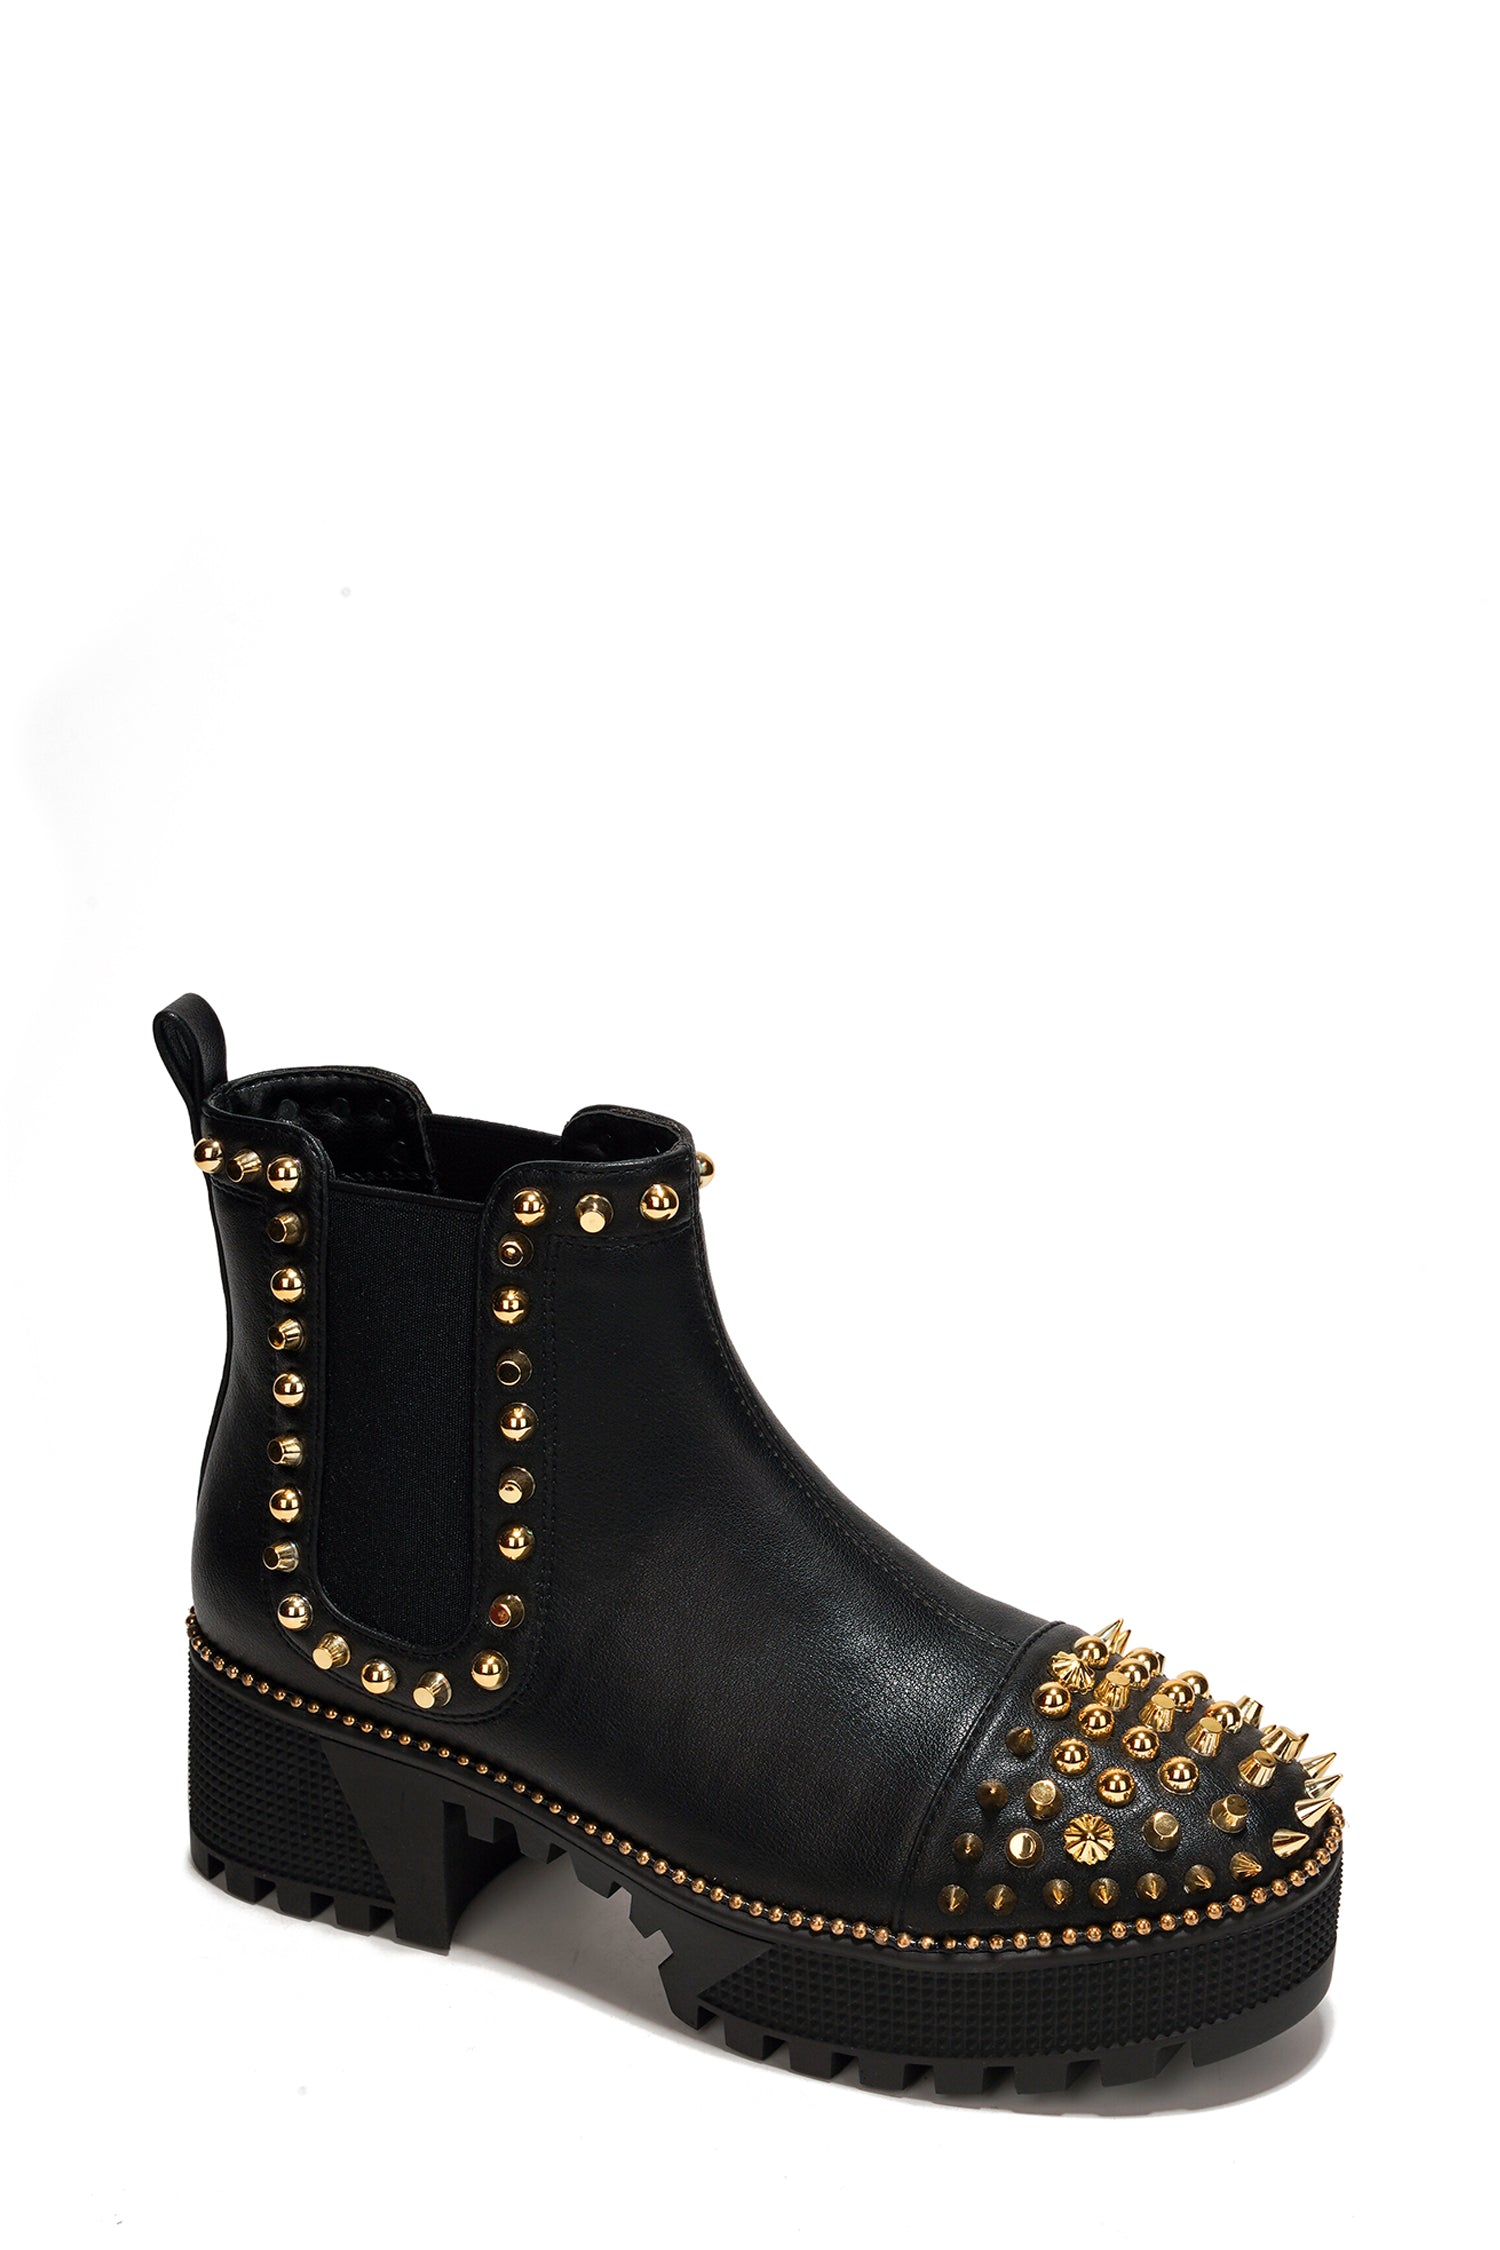 Cape Robbin - SPIKY - BLACK GOLD - BOOTIES